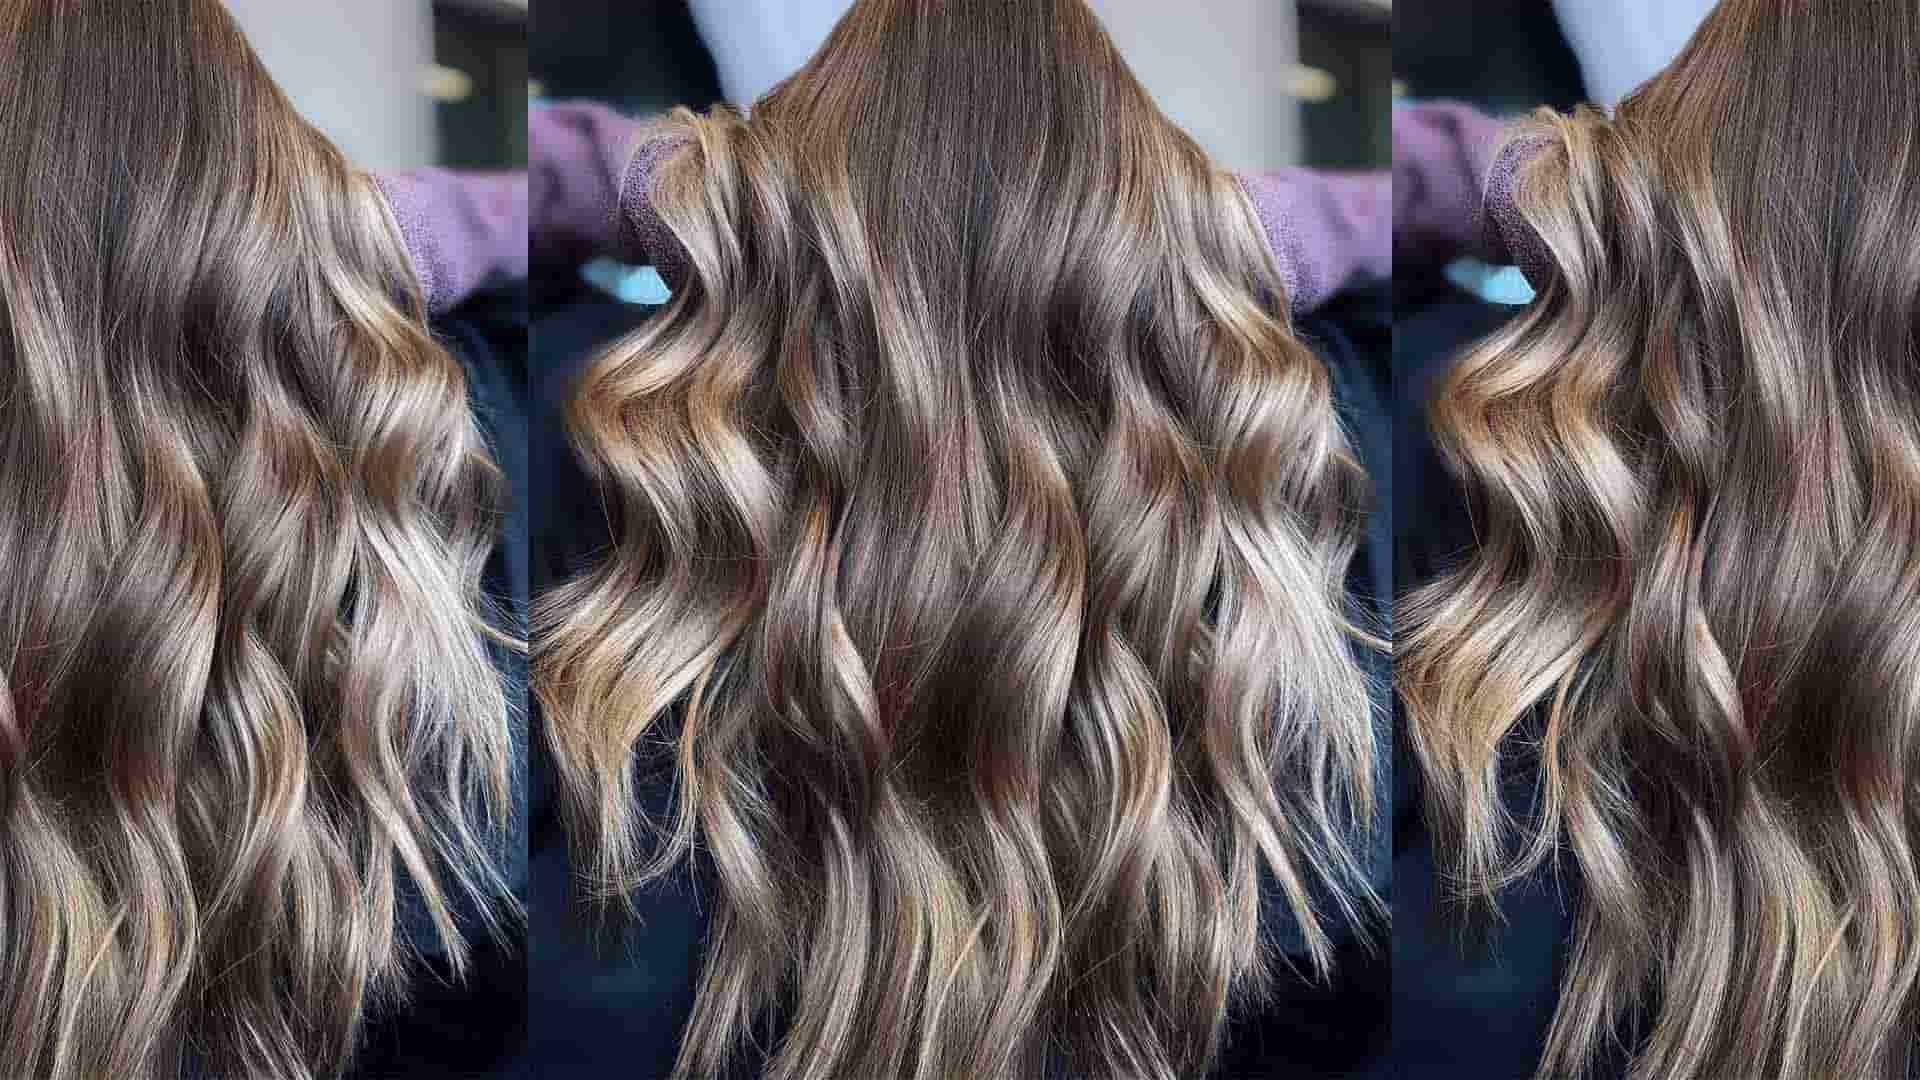 What Is The Reverse Balayage Hair Color Trend